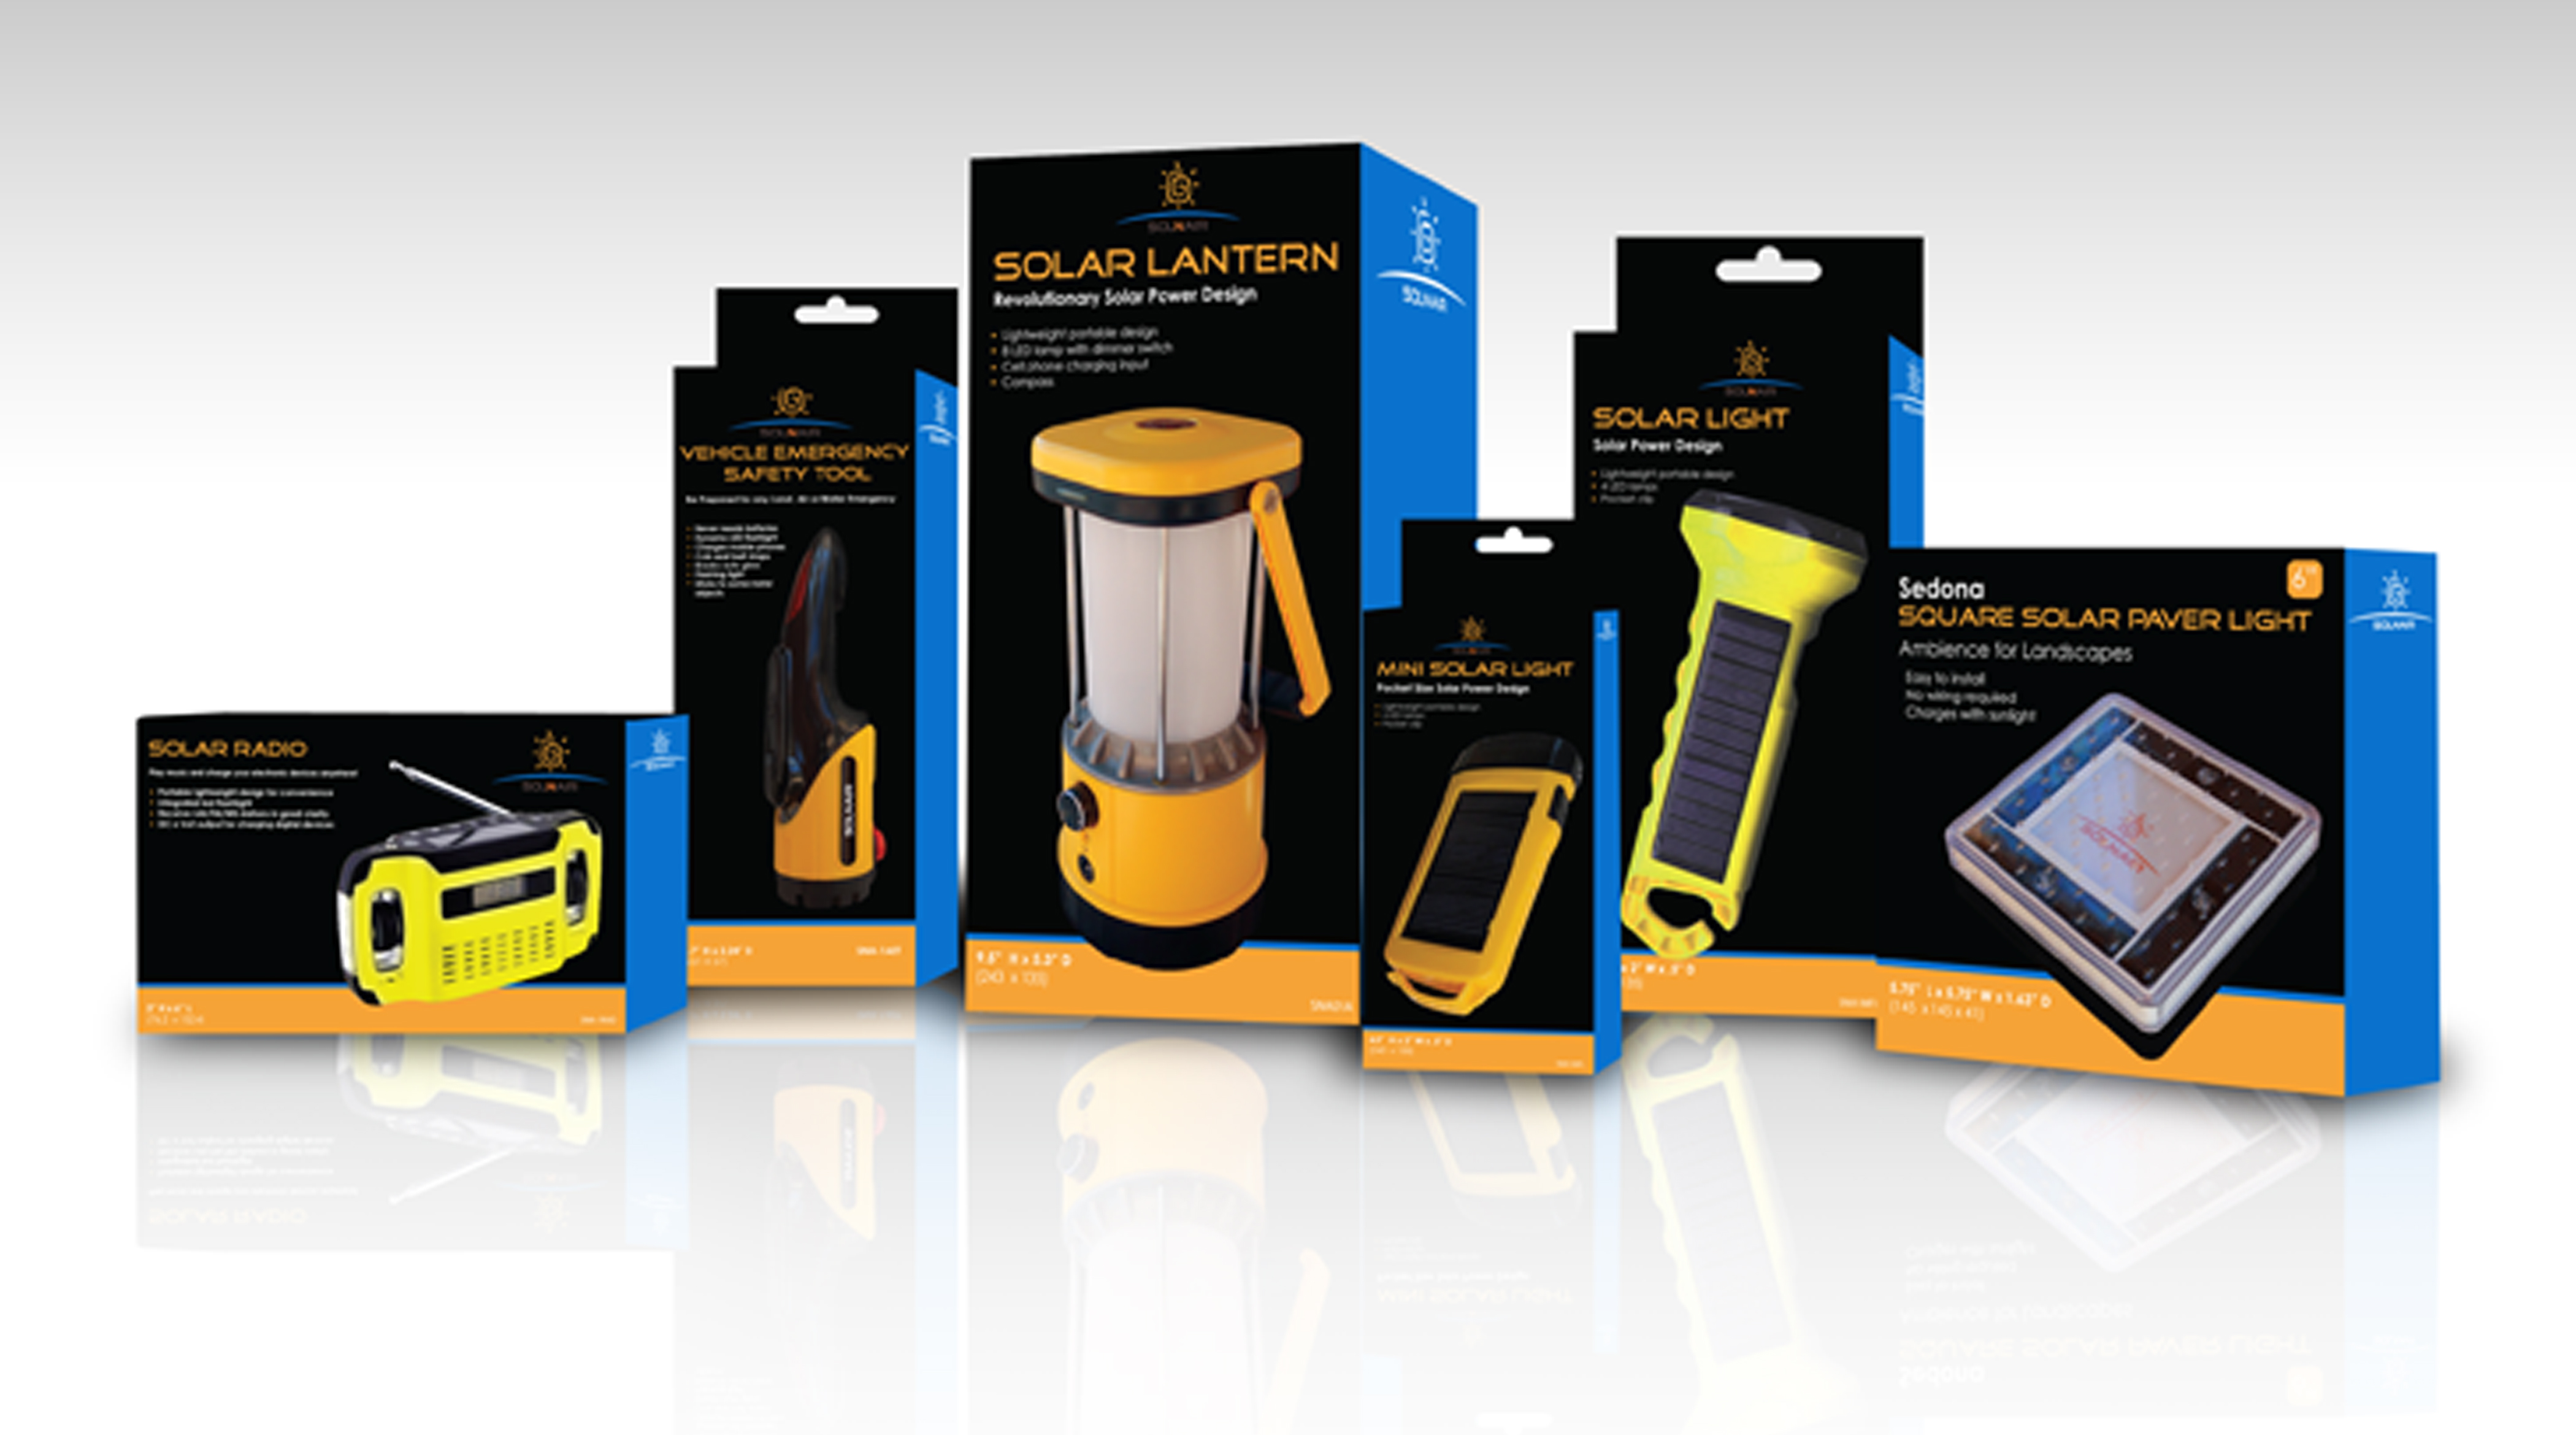 Avadium packaging design of solar power products using innovative technology